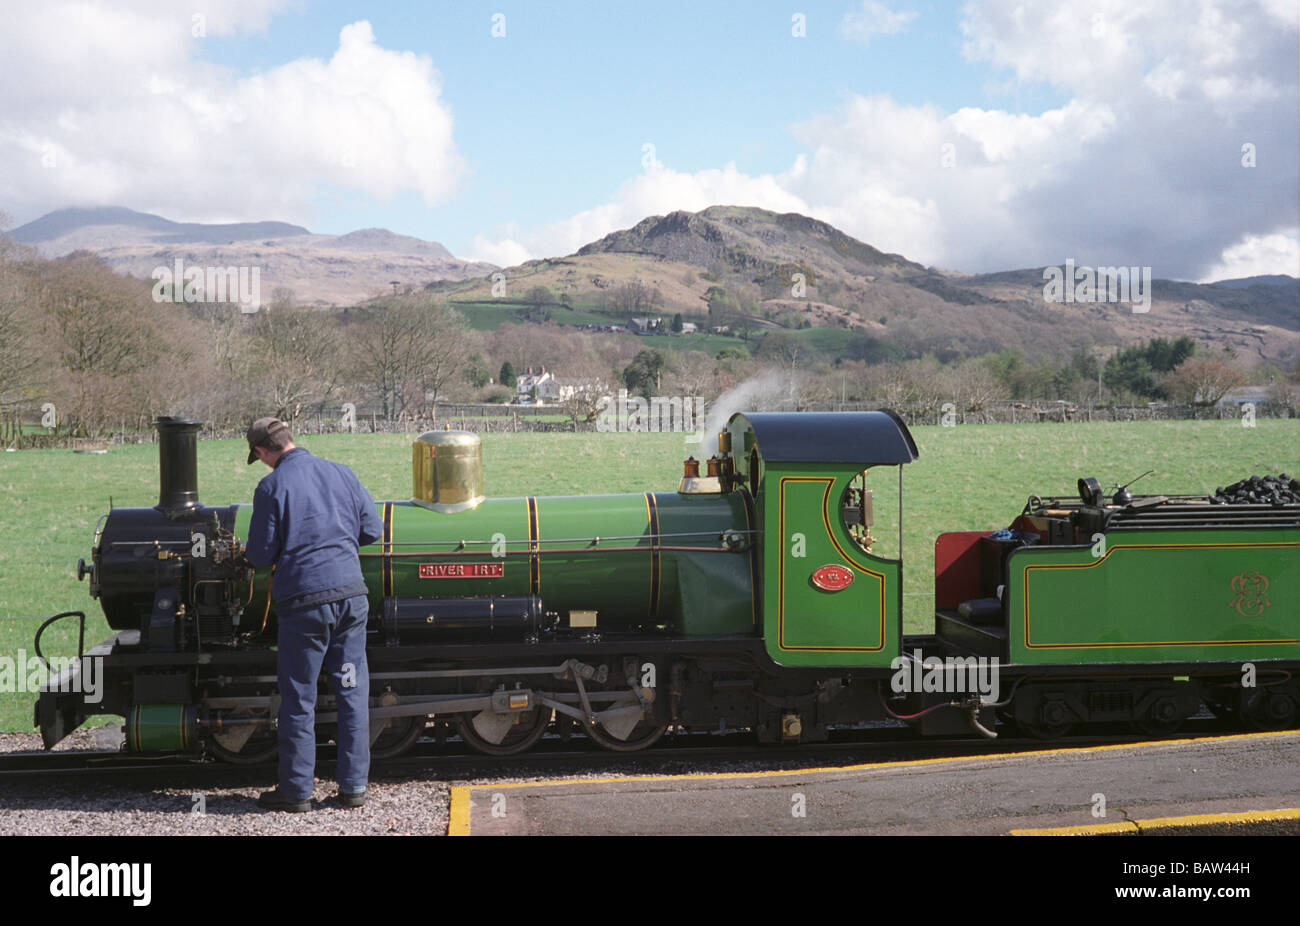 An engineer maintains a 15 inch gauge steam locomotive train before departure with the hills of Eskdale in the background. Stock Photo